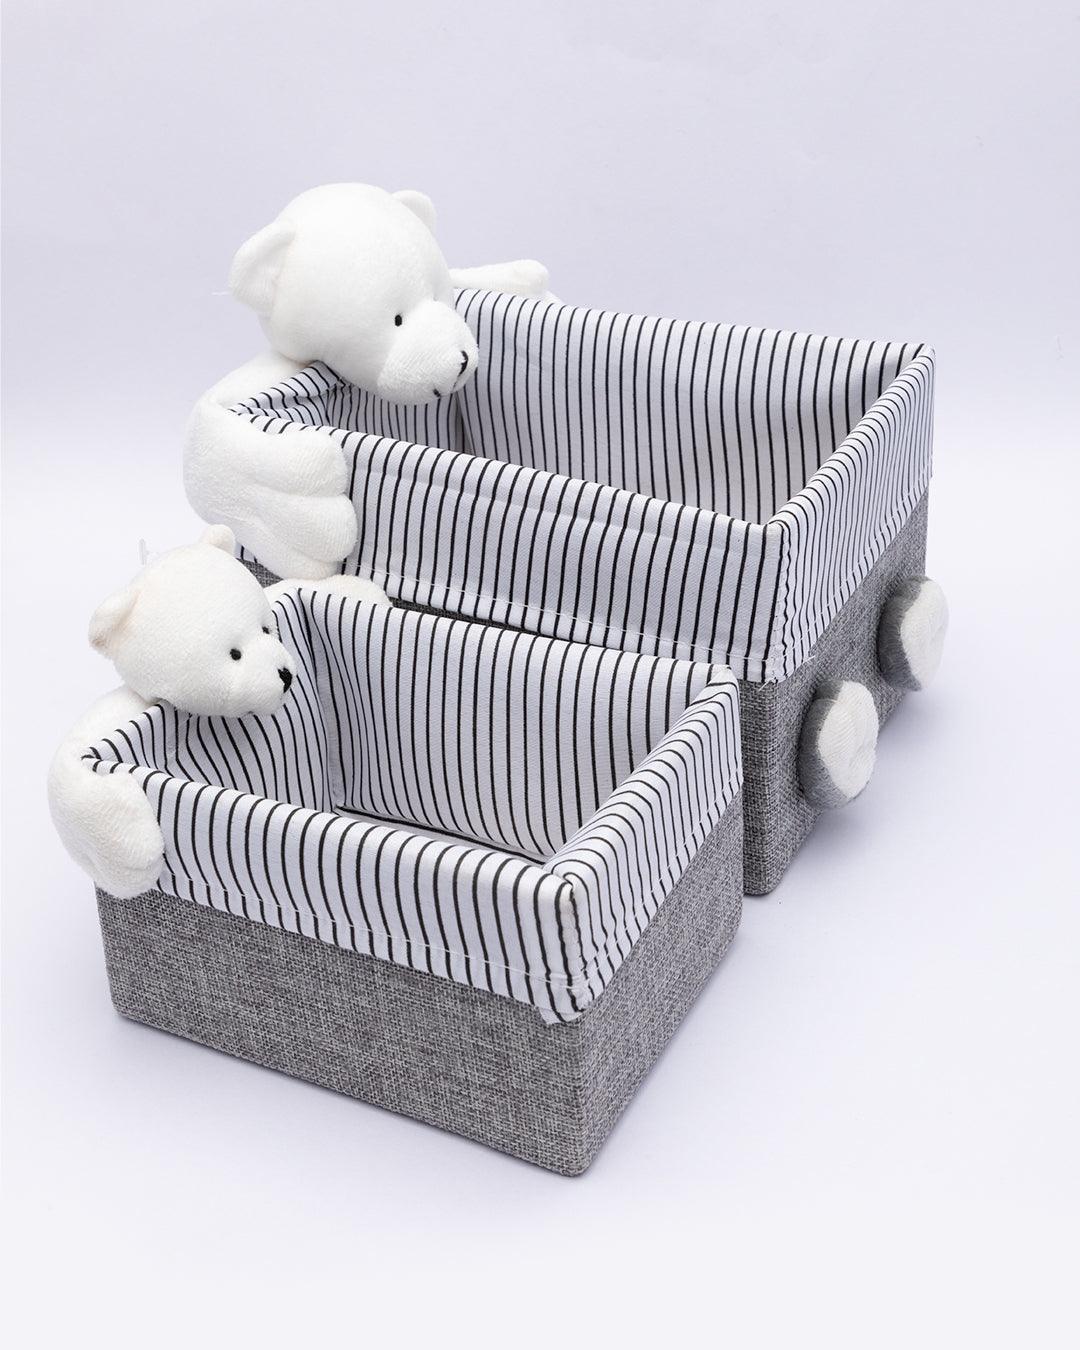 Fabric Toy Basket, for Home Storage, Teddy Bear, Grey, Paper & Fabric, Set of 2 - MARKET 99